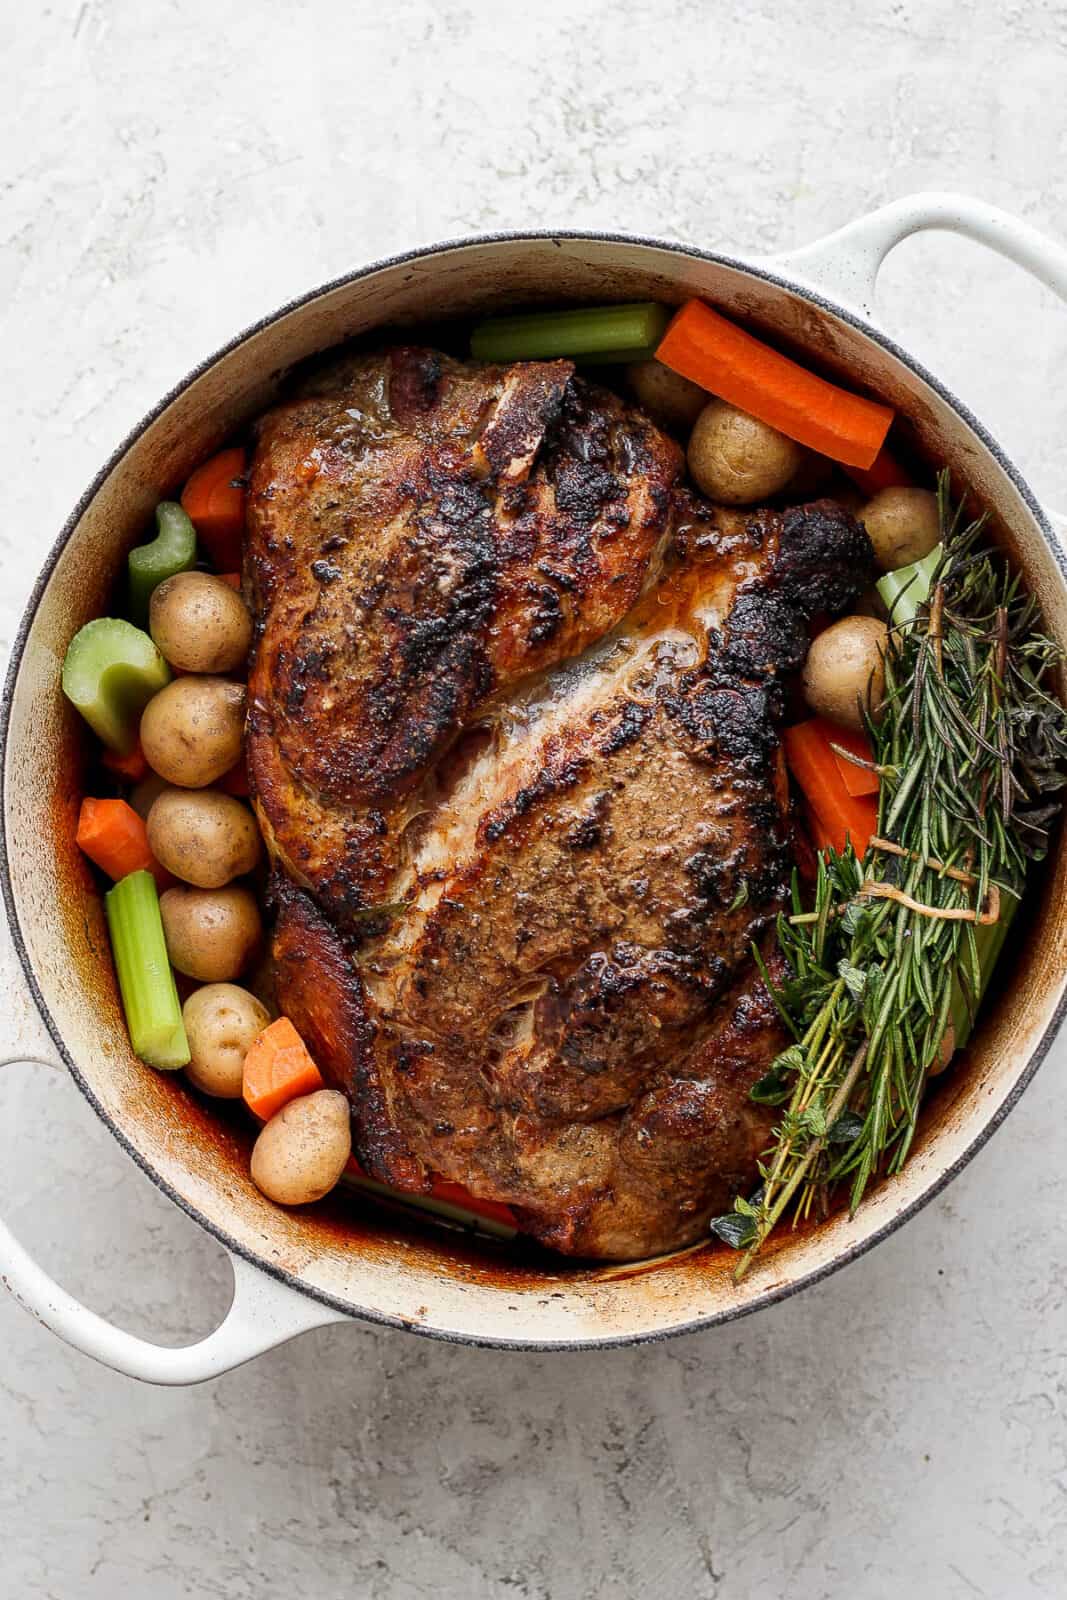 Cooked pork roast in a dutch oven.